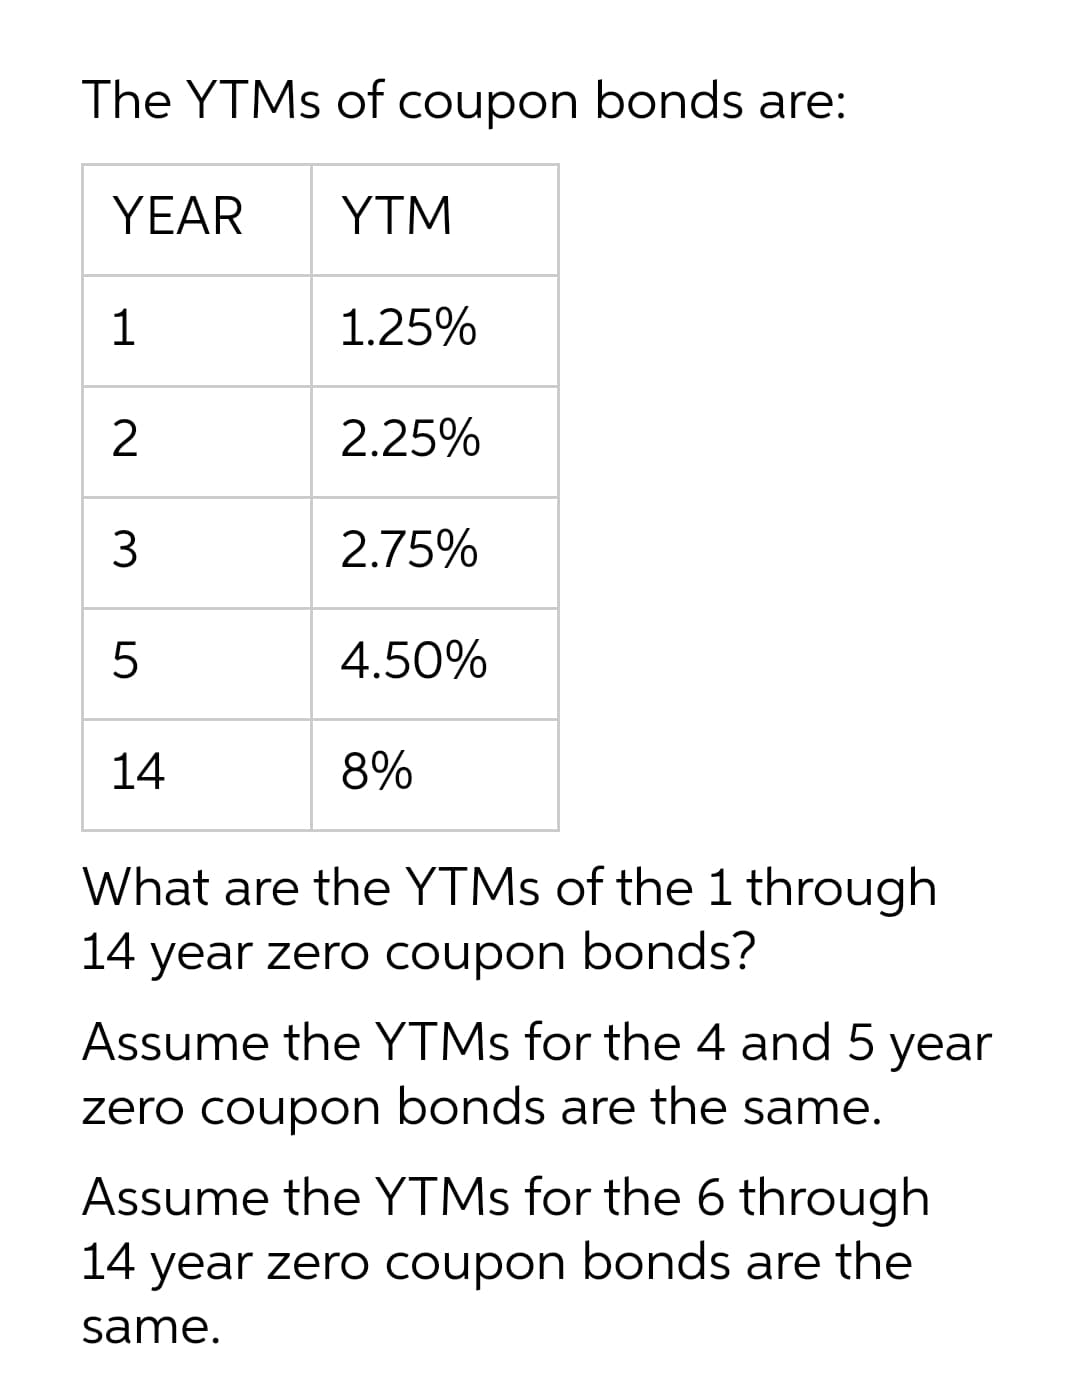 The YTMS of coupon bonds are:
YEAR
YTM
1
1.25%
2
2.25%
3
2.75%
4.50%
14
8%
What are the YTMS of the 1 through
14 year zero coupon bonds?
Assume the YTMS for the 4 and 5 year
zero coupon bonds are the same.
Assume the YTMS for the 6 through
14 year zerO coupon bonds are the
same.
